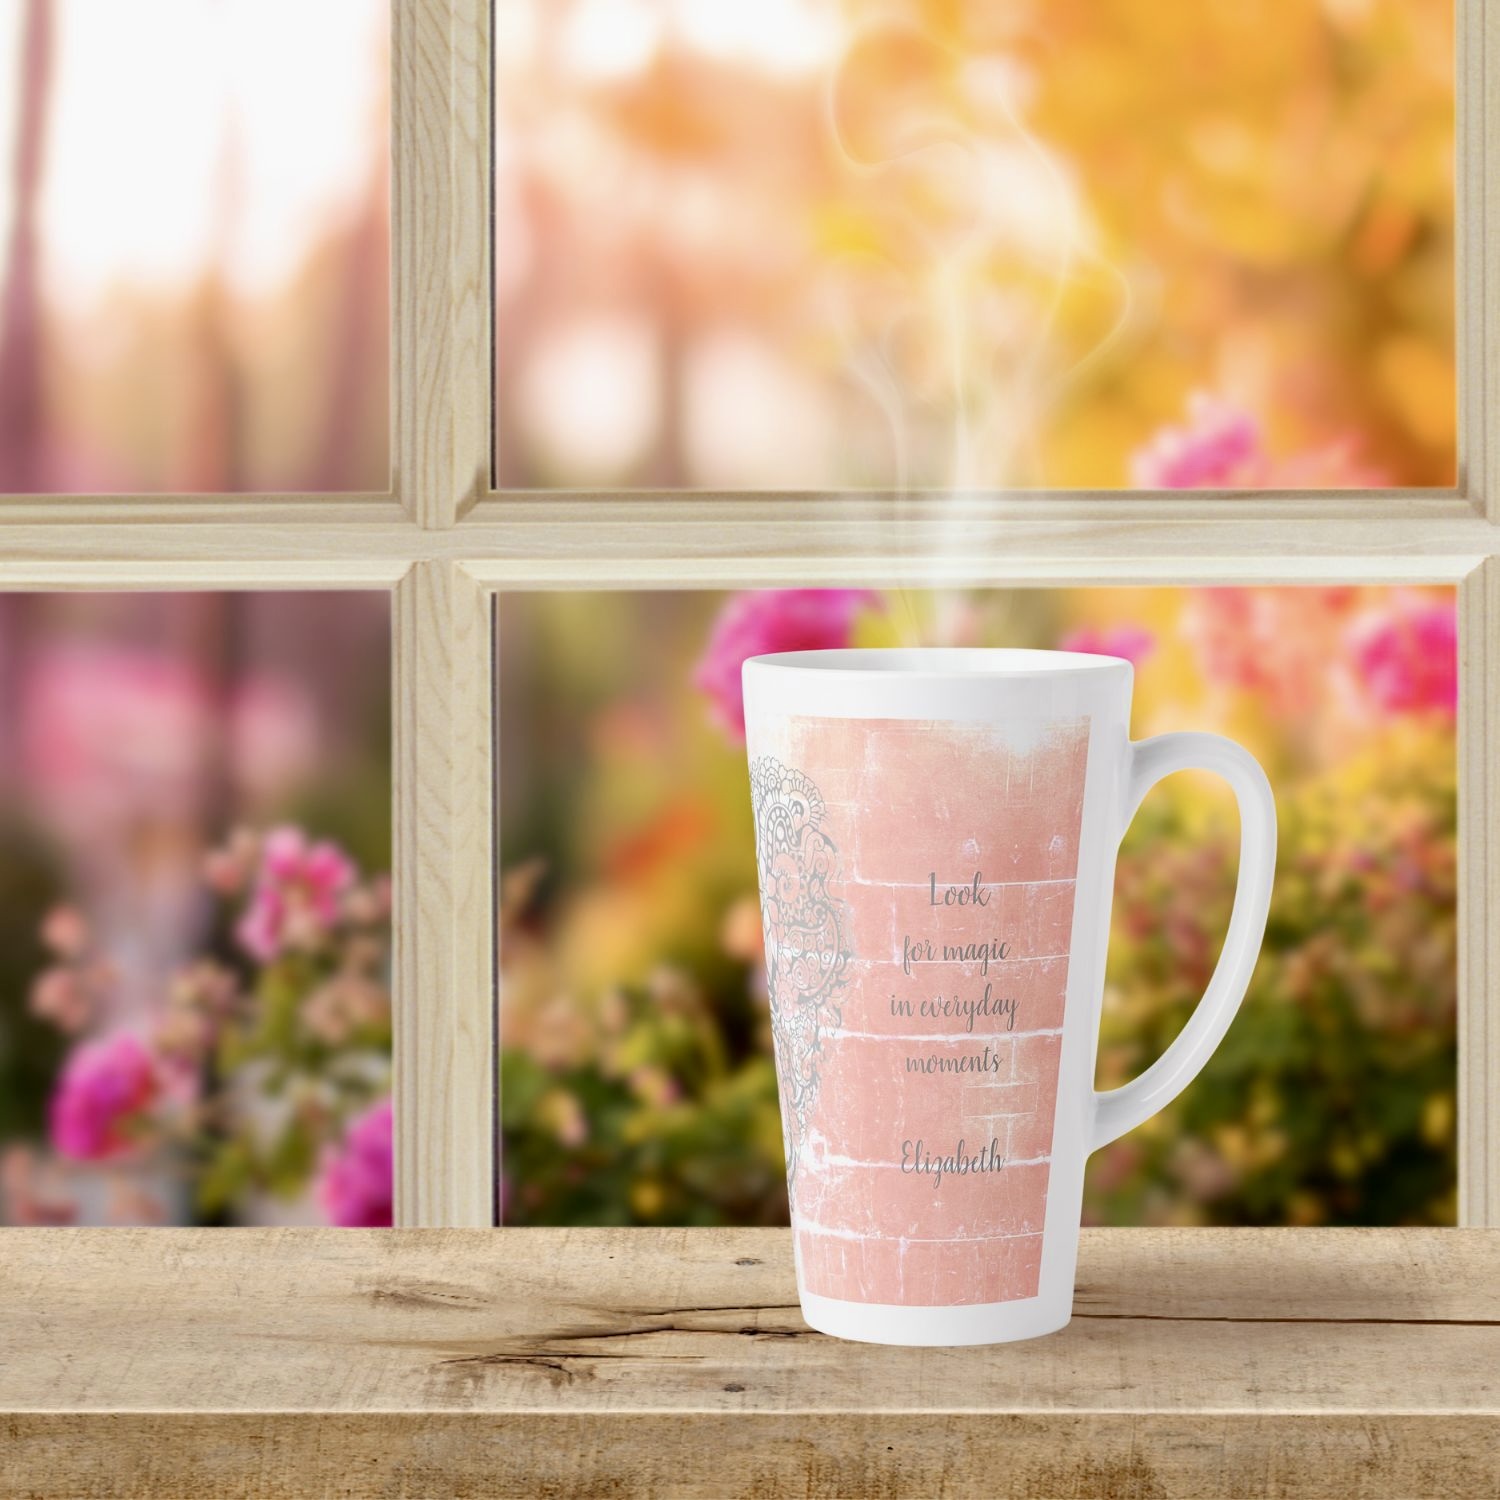 A latte mug featuring a serene peach hue with an inspiring message imprinted on its surface.